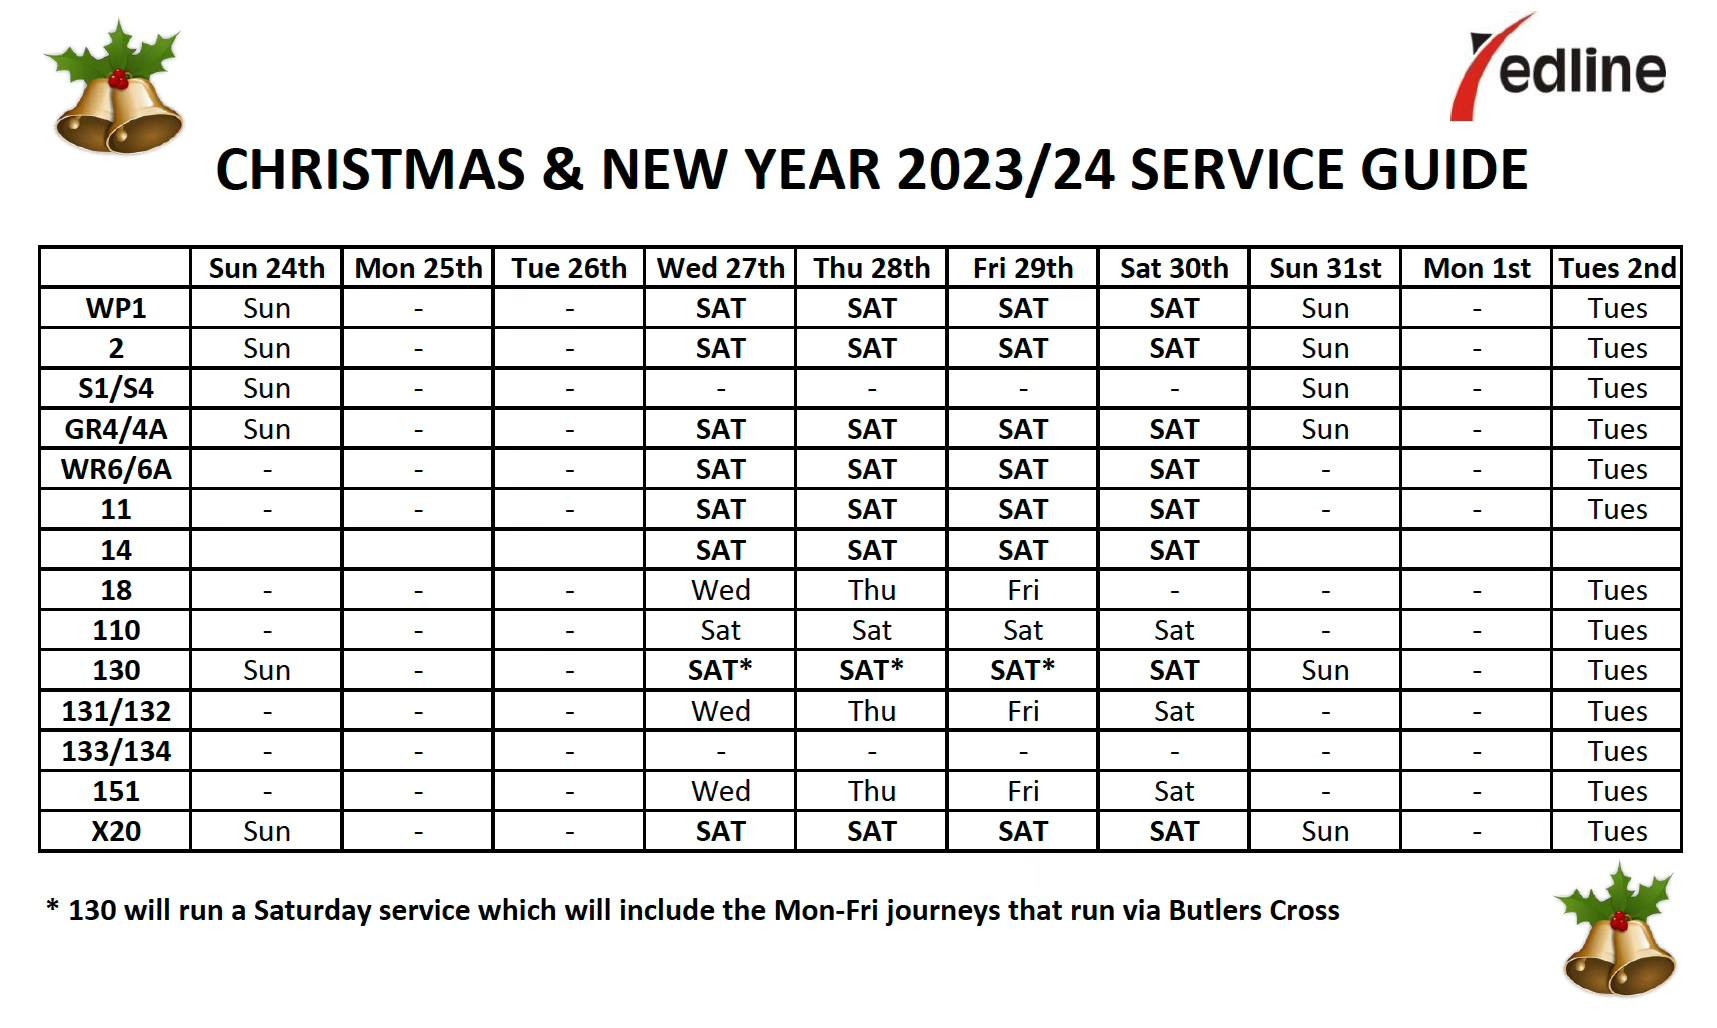 Christmas & New Year 23/24 Service Guide